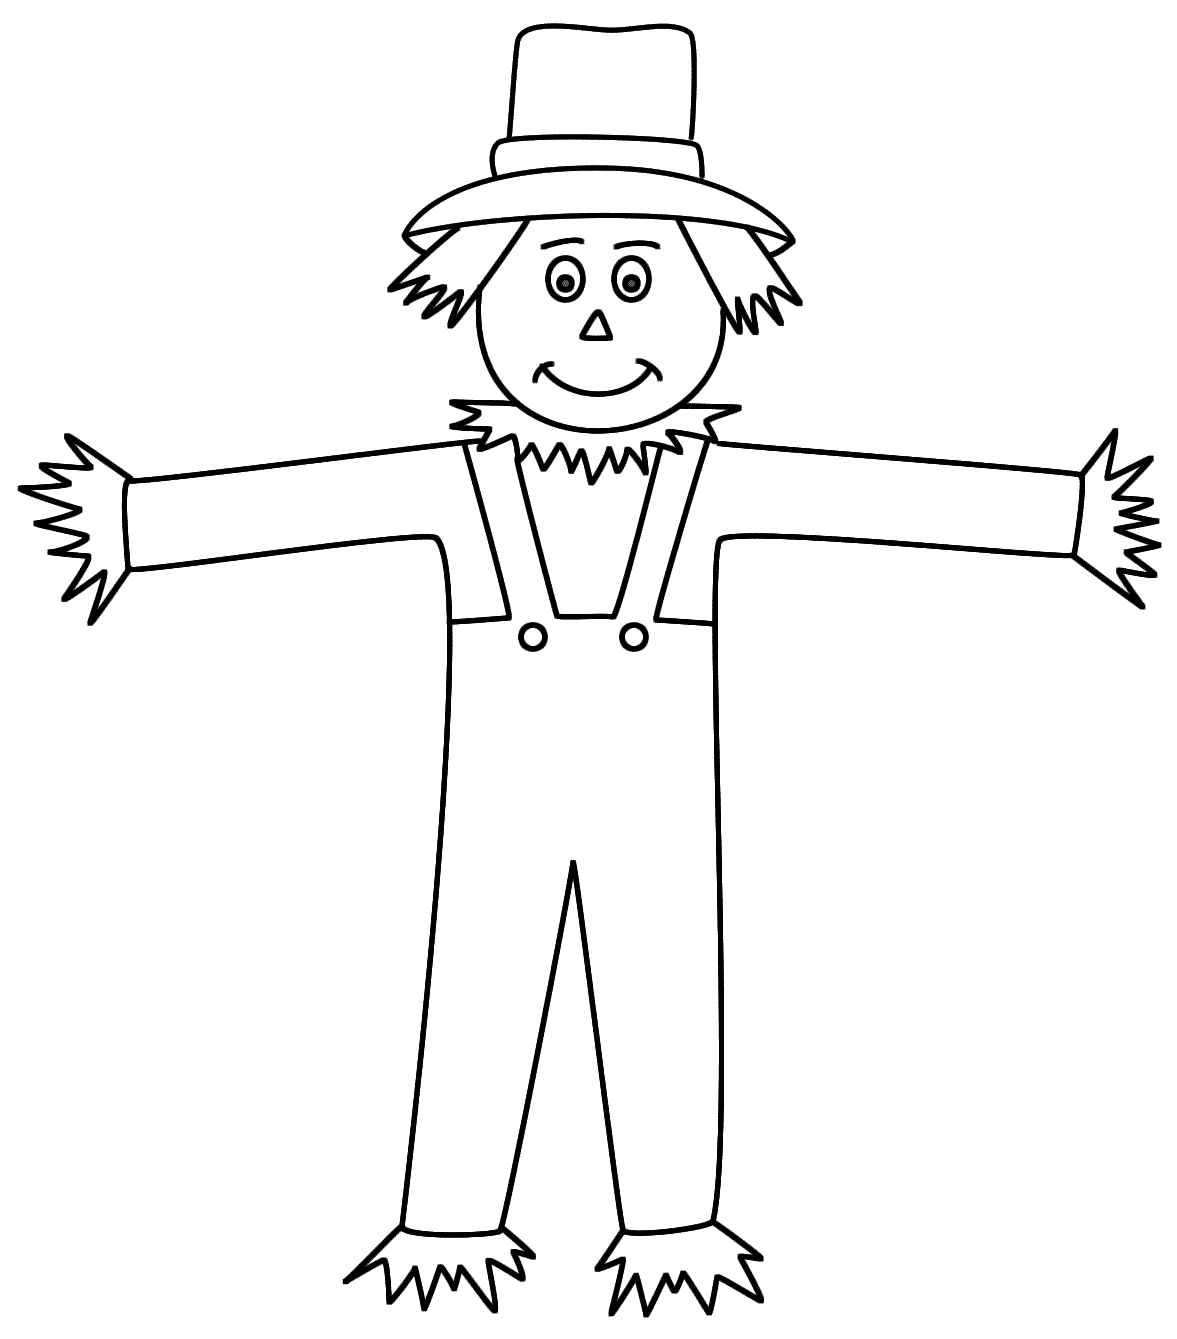 simple-and-hard-scarecrow-coloring-pages-101-coloring